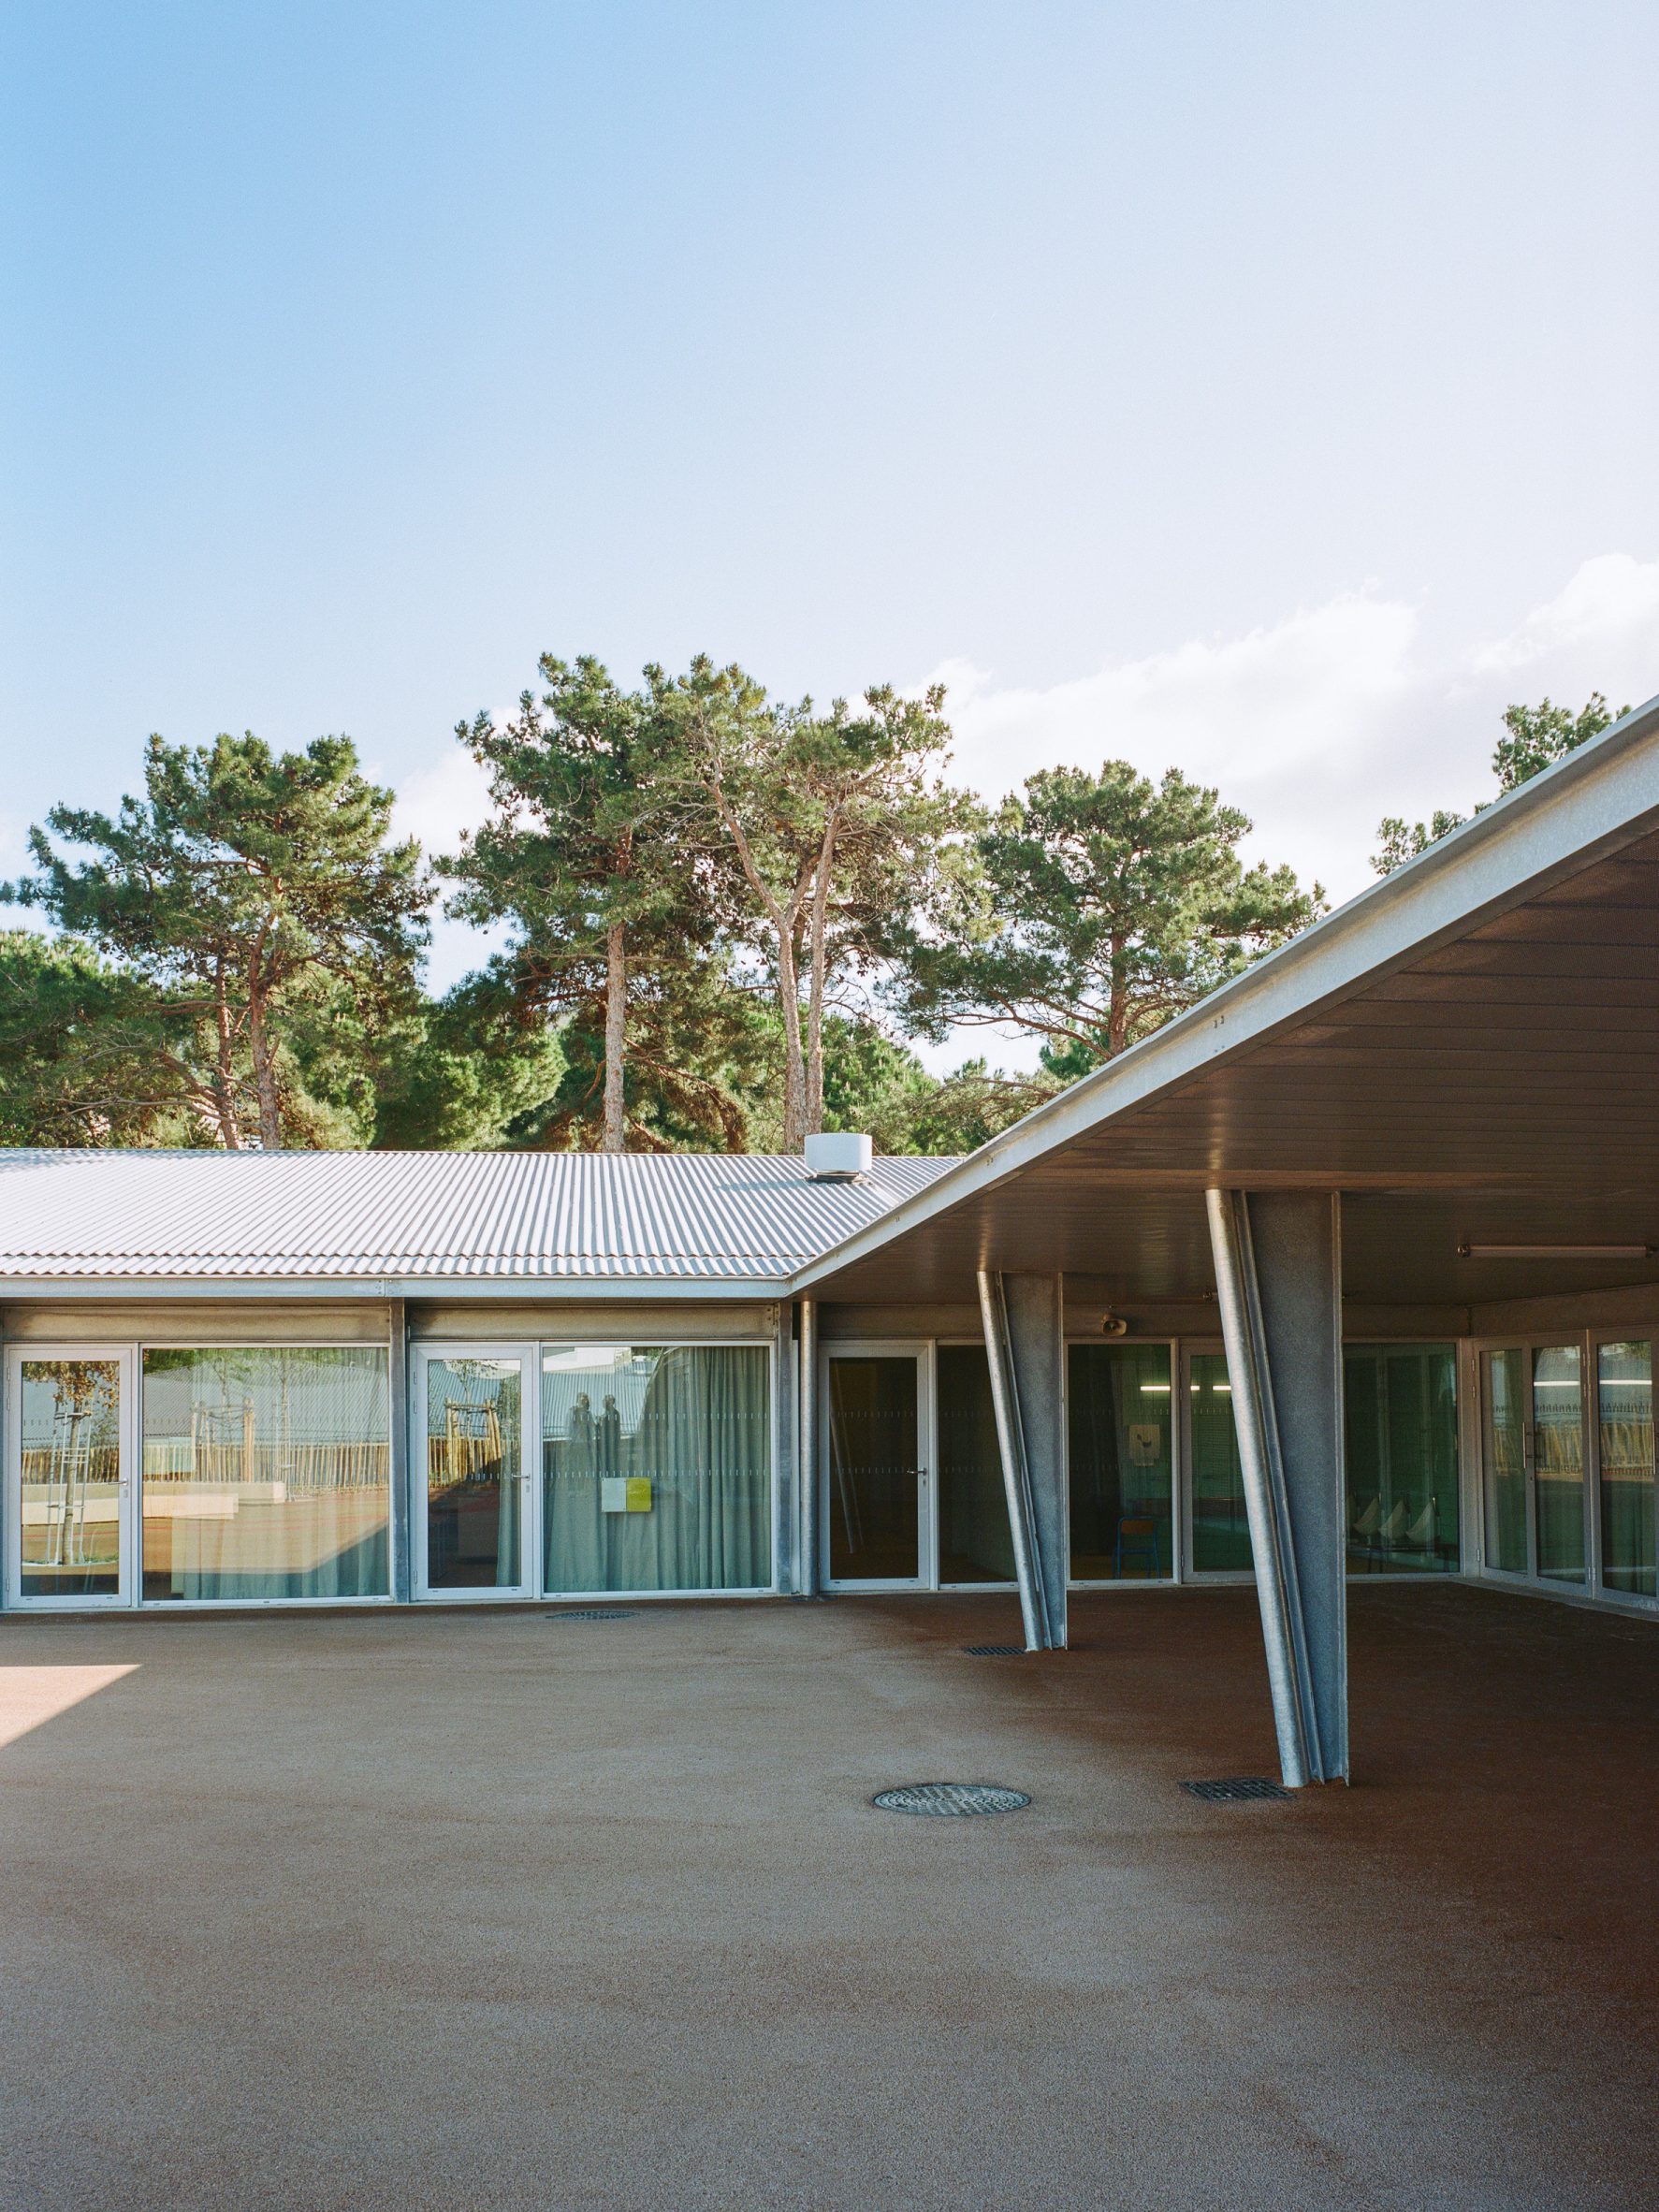 View of courtyard at school in France by Ateliers O-S and NAS Architecture